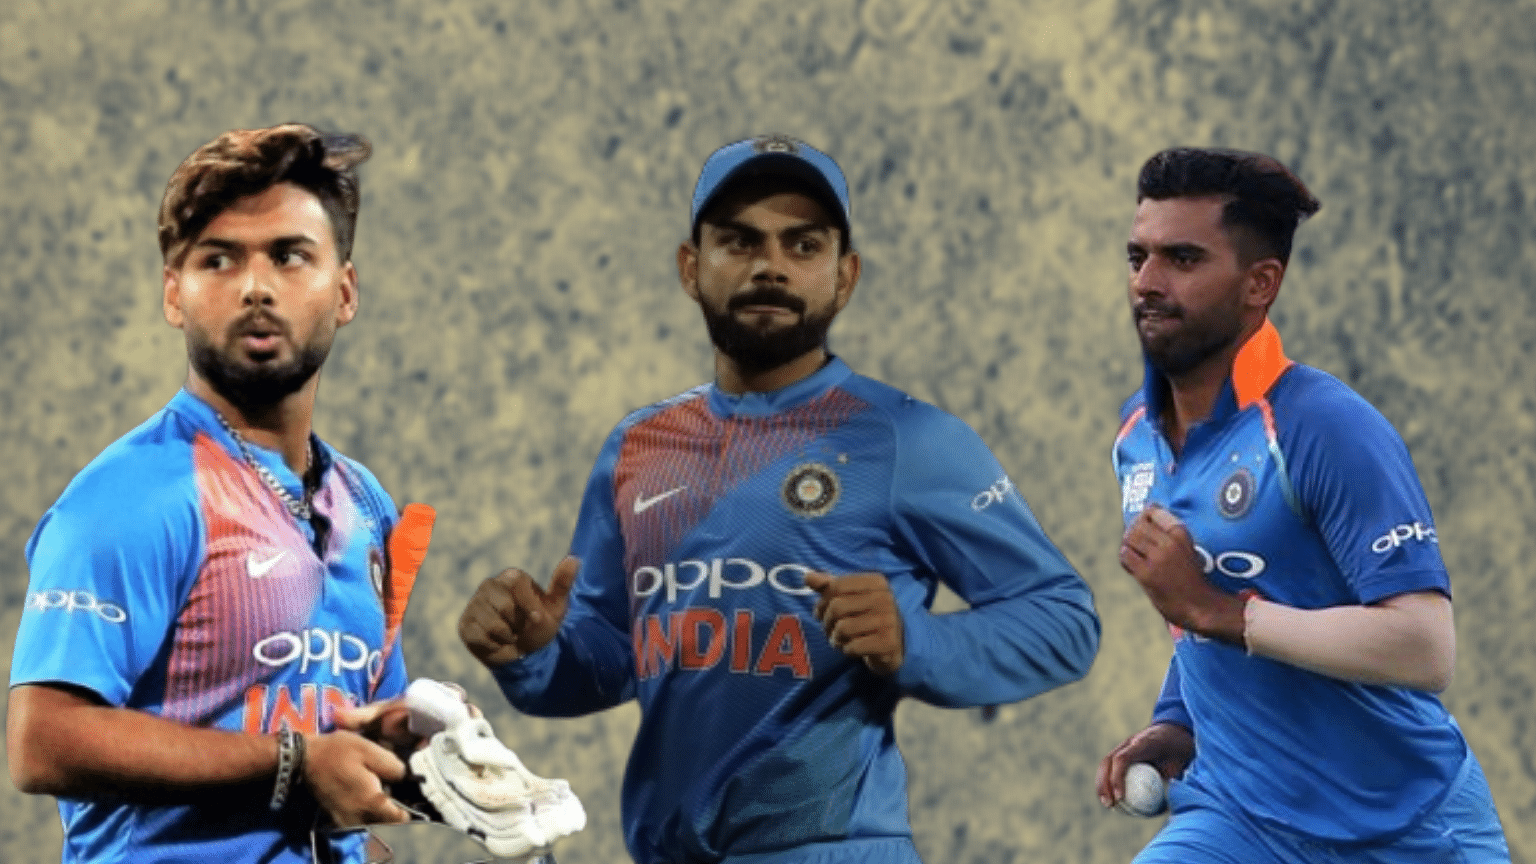 While Virat Kohli (centre), Deepak Chahar (right) made their mark in the series, Rishabh Pant continued to struggle with the bat.